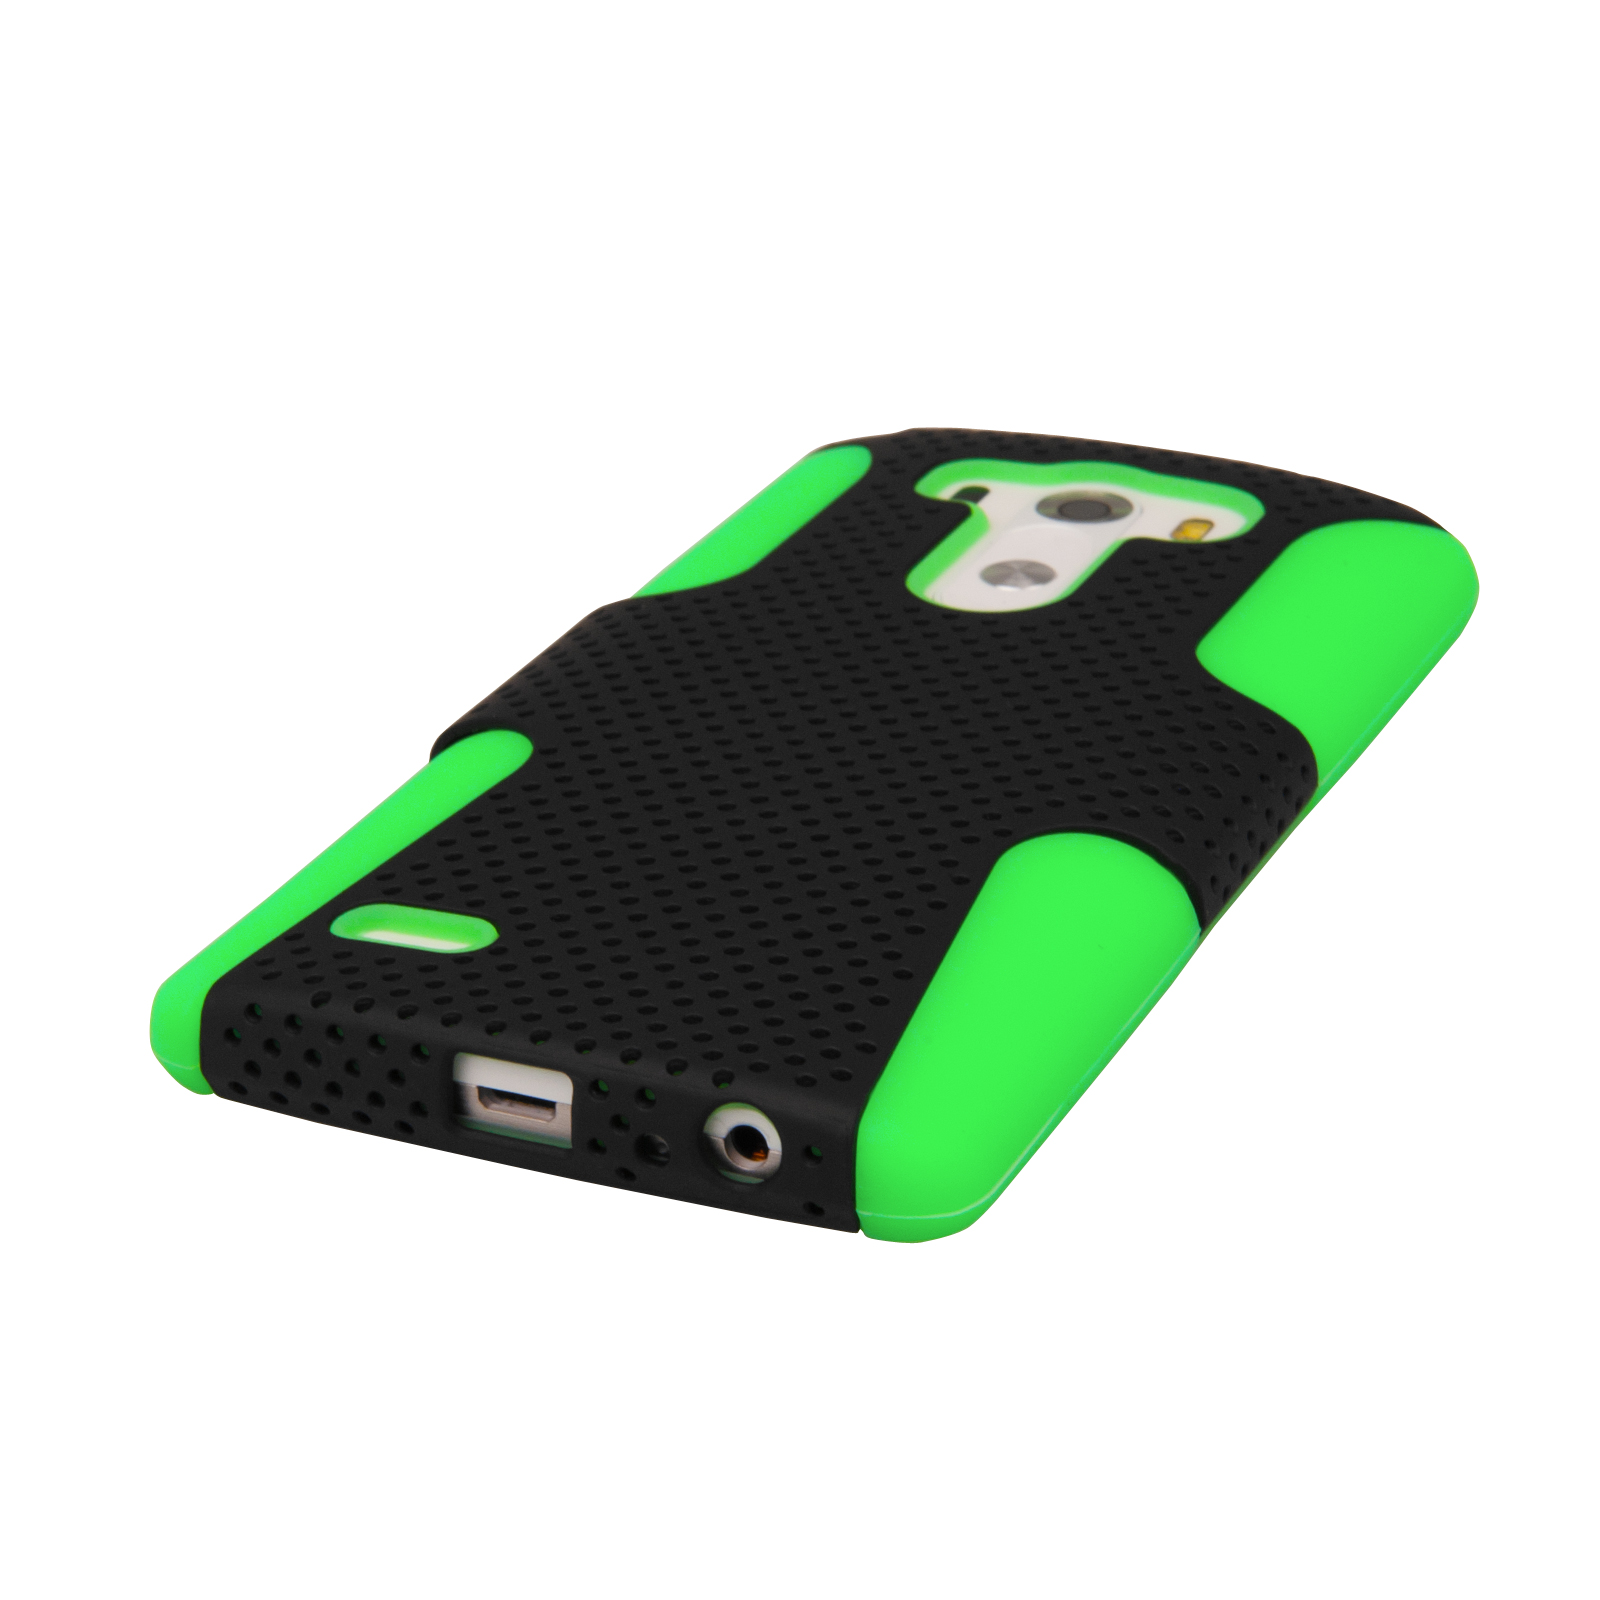 YouSave Accessories LG G3 Tough Mesh Combo Silicone Case - Green-Black